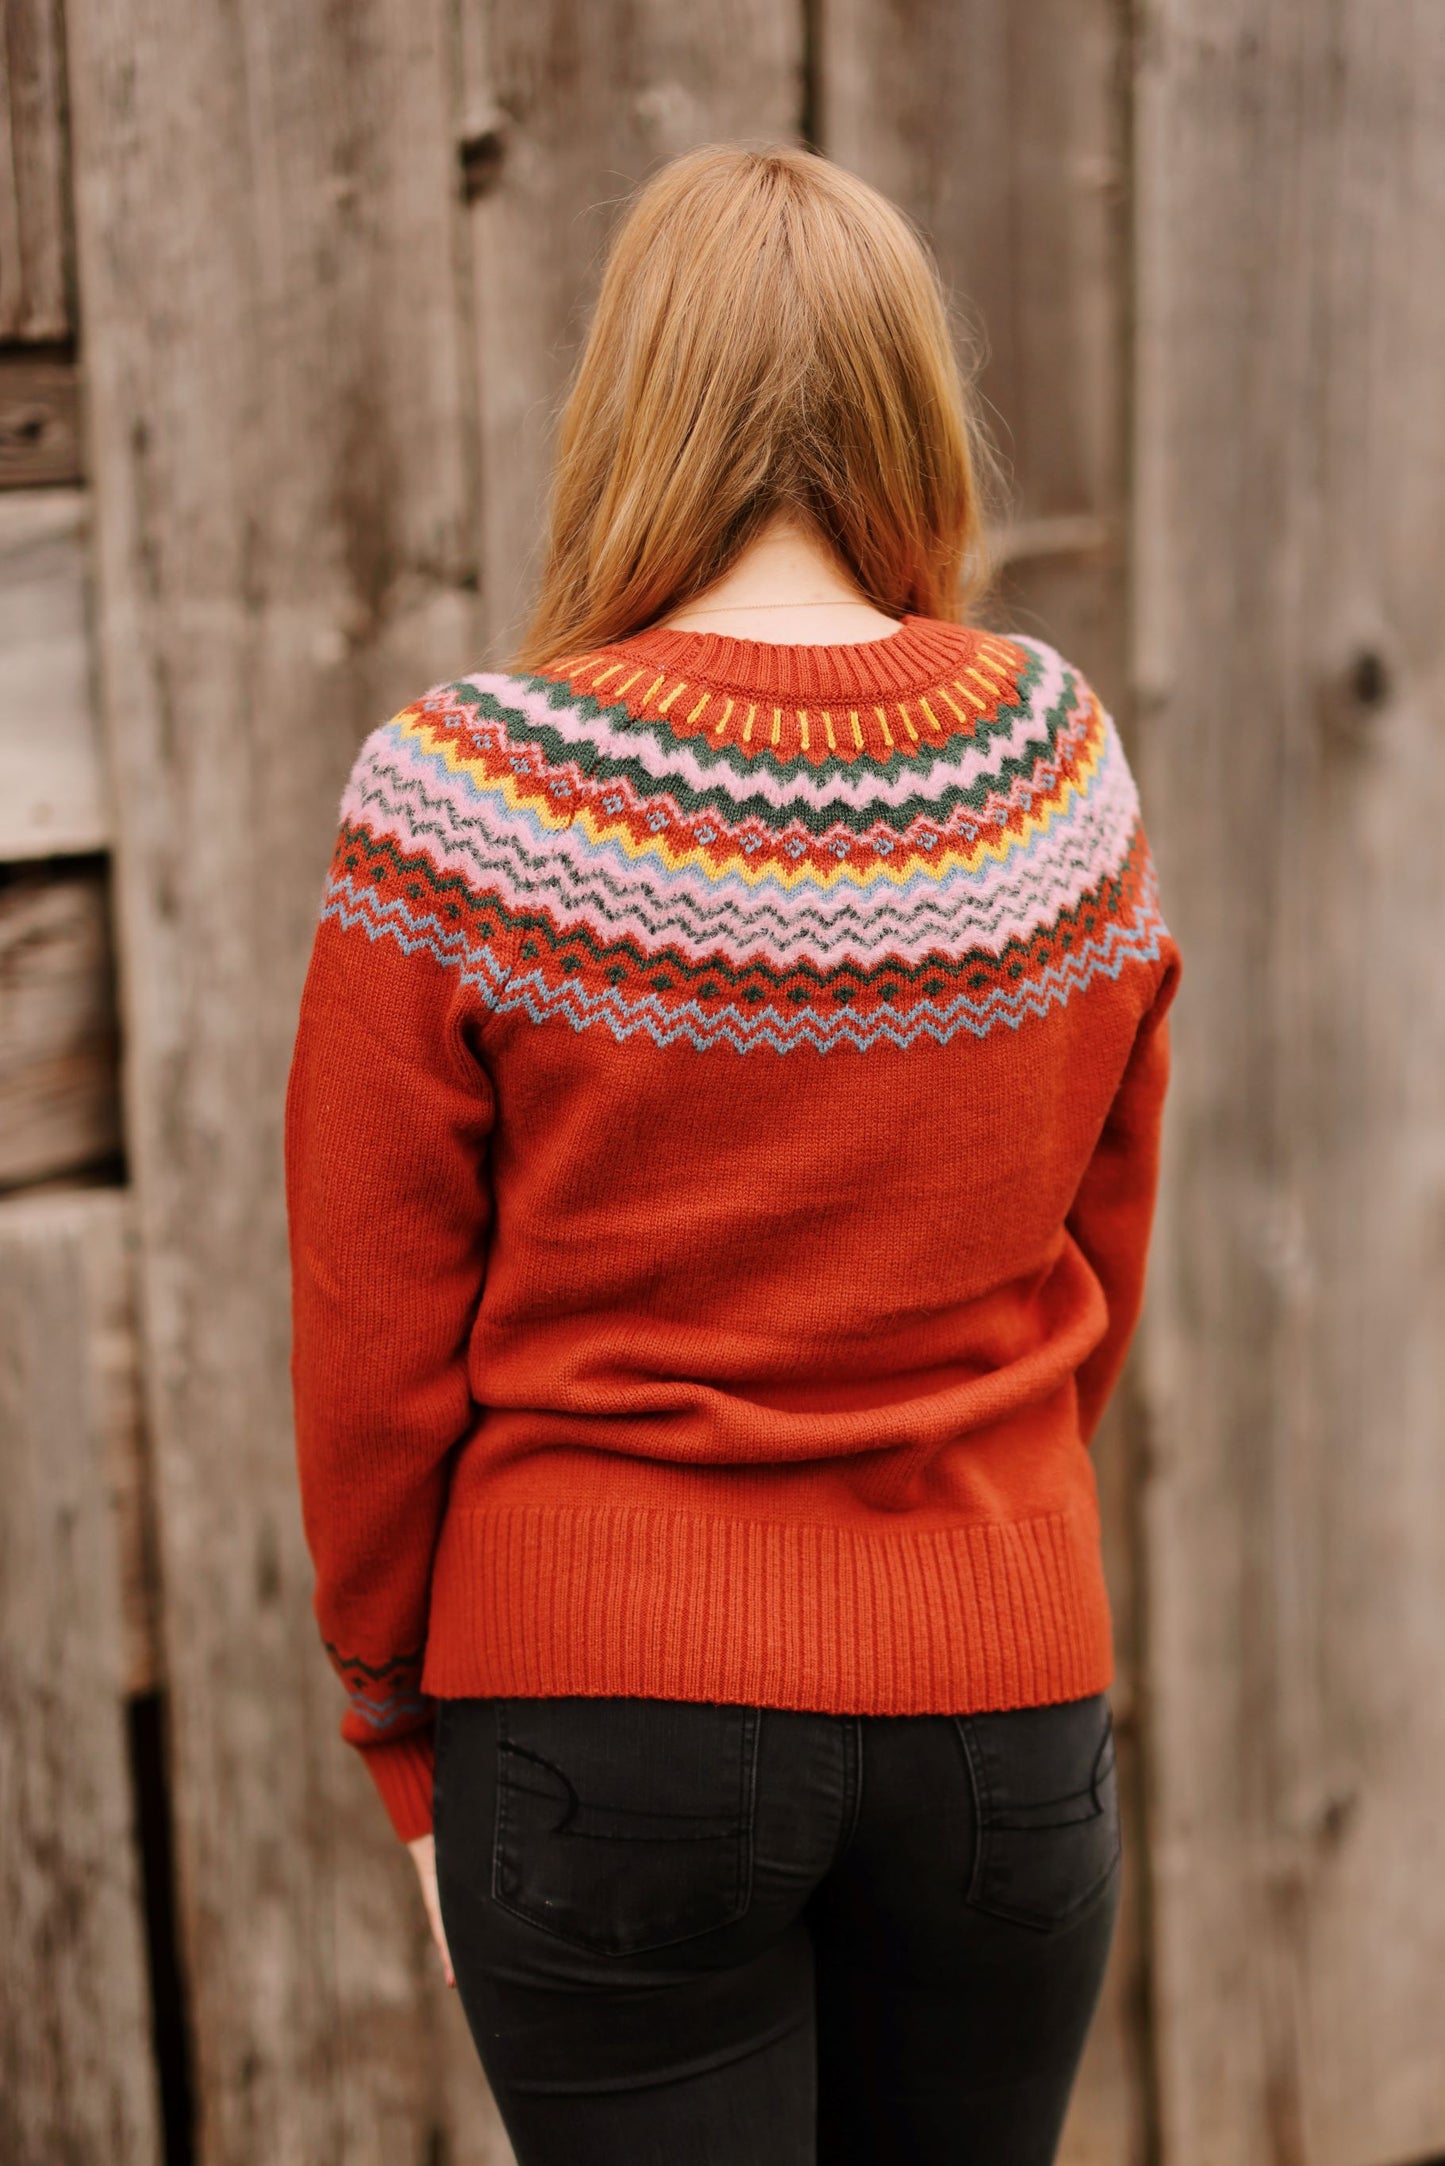 Woodland Warmth Sweater (2 colors)